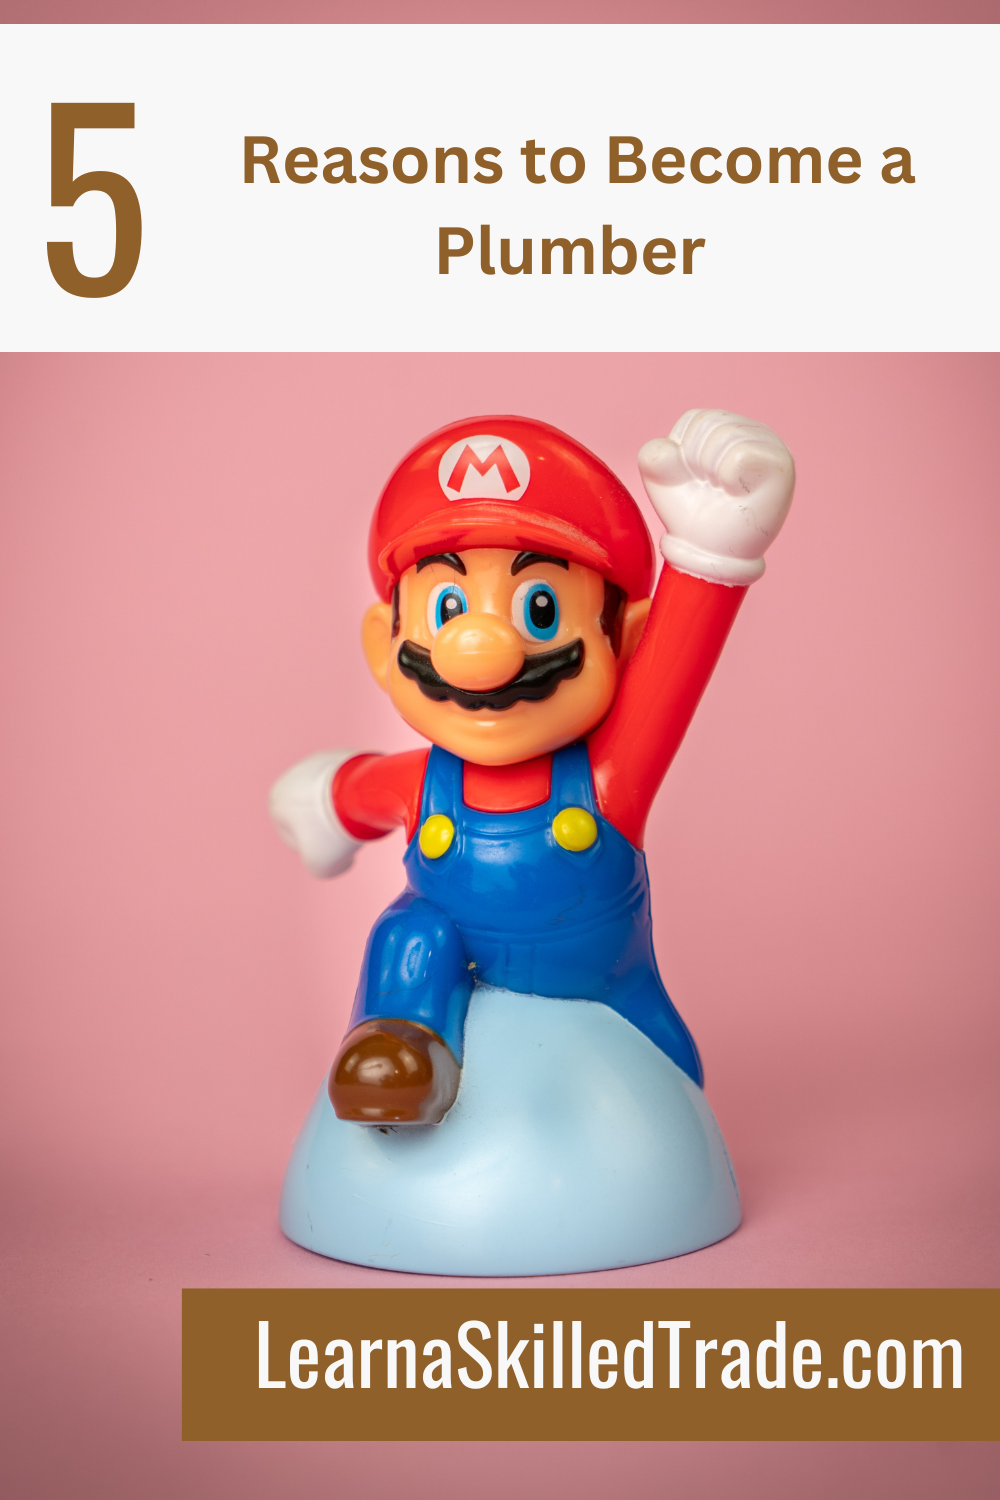 5 Reasons to Become a Plumber - Learn a Skilled Trade